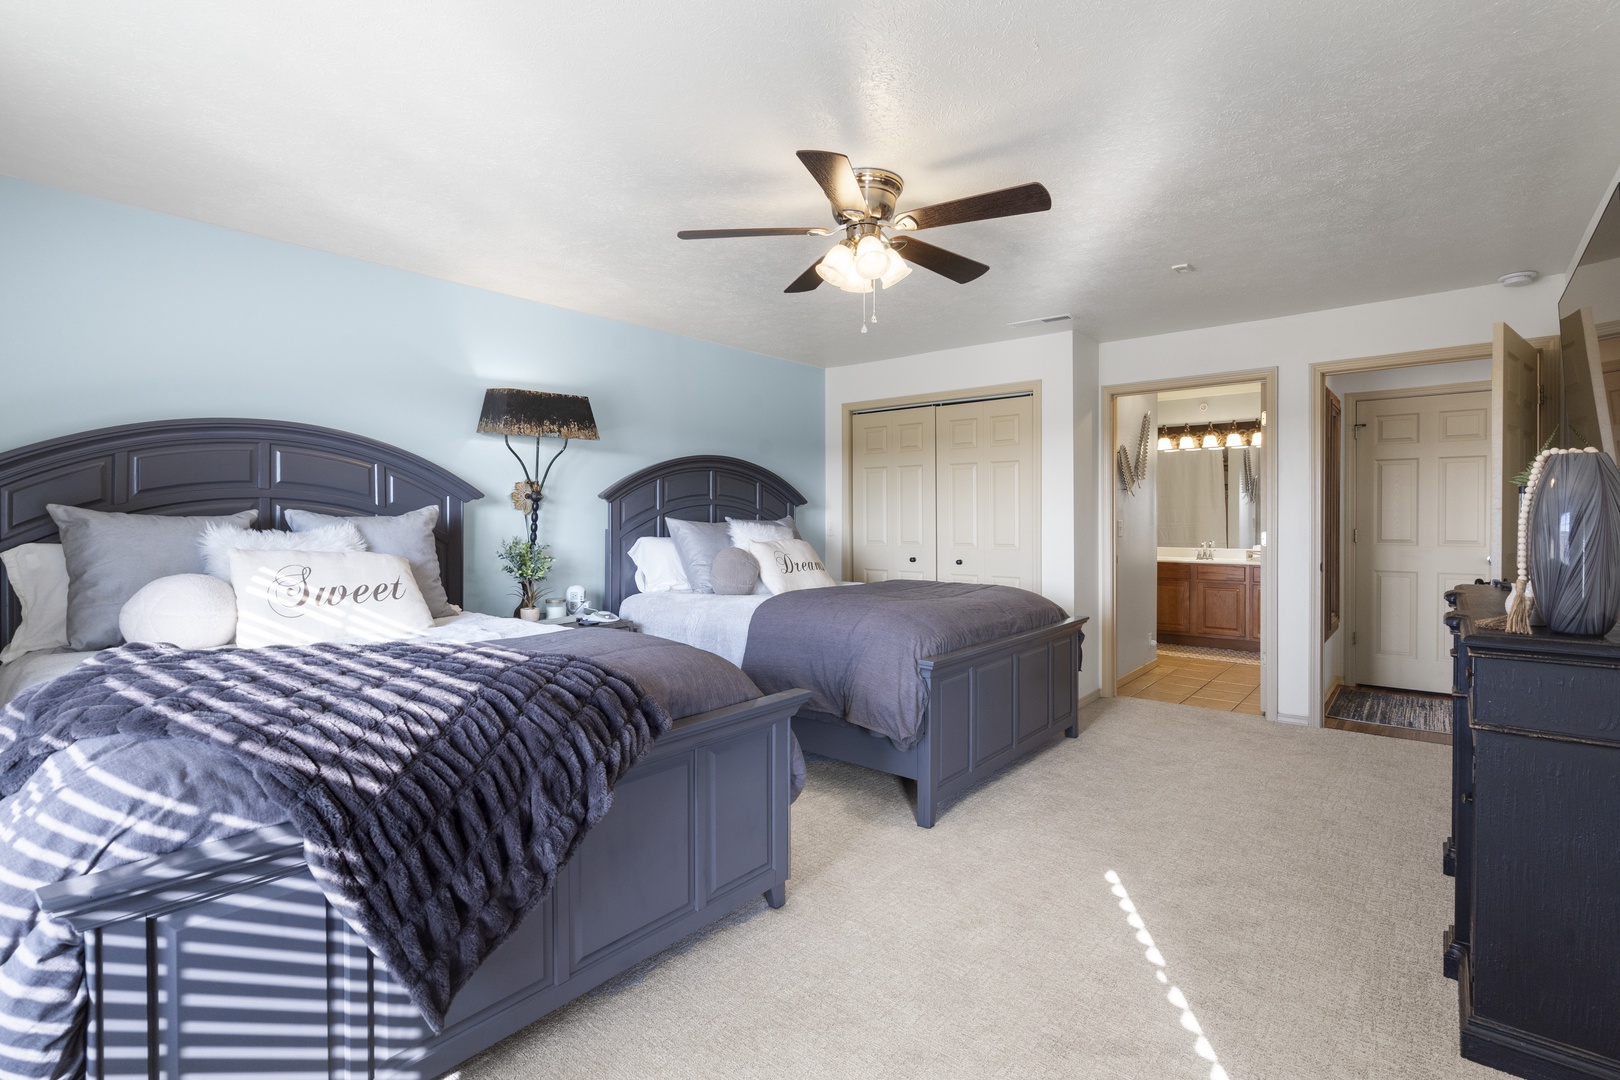 The master suite features a pair of queen beds, private ensuite, balcony access, & TV